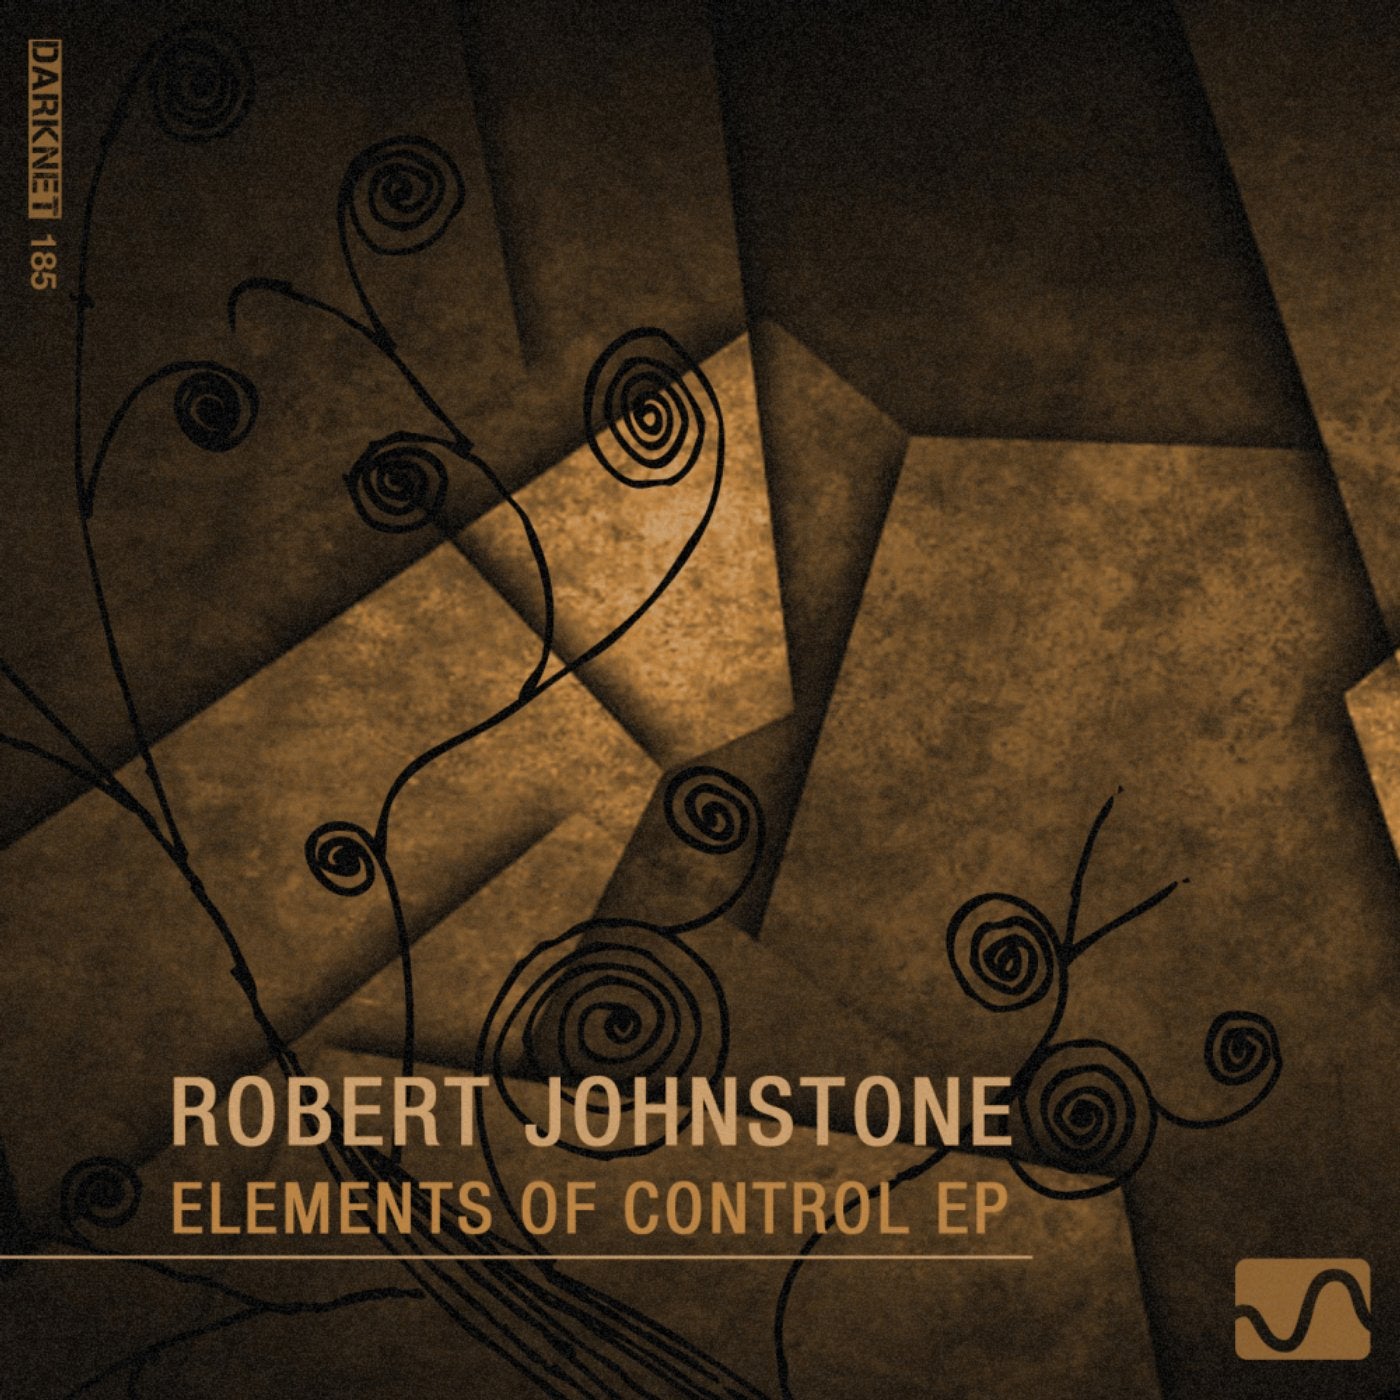 Elements Of Control EP